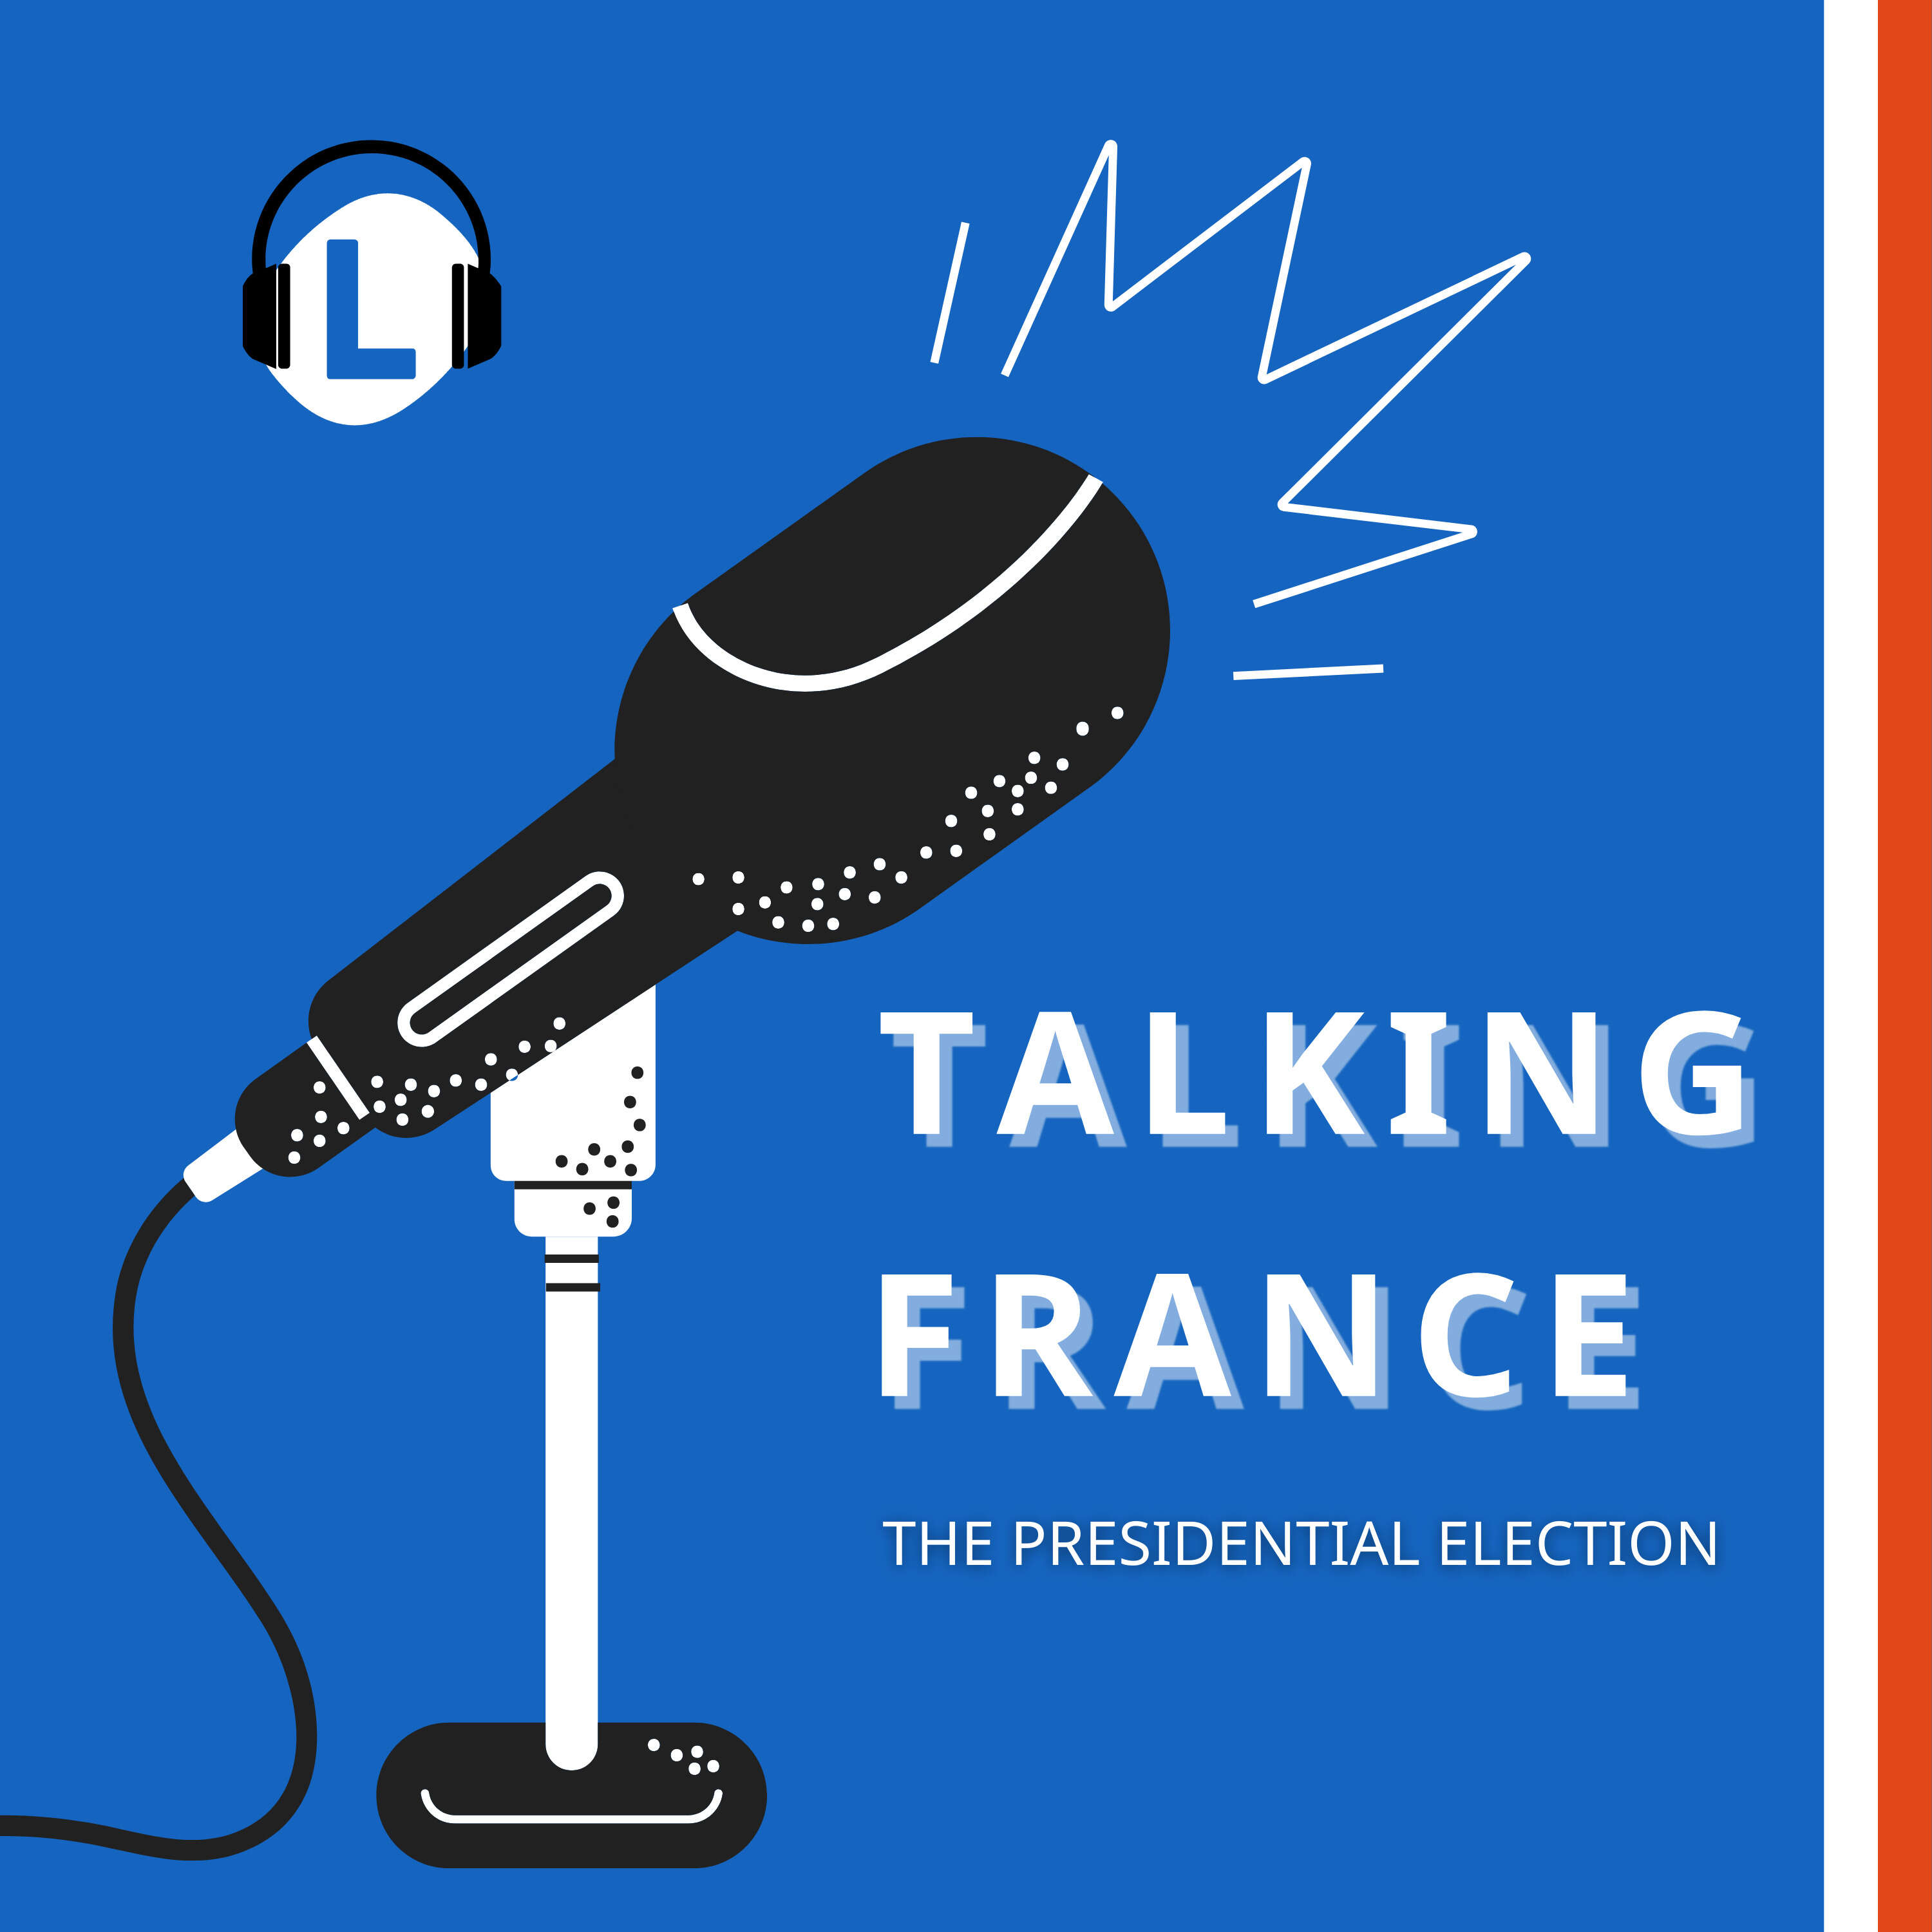 Macron vs Le Pen - who will win the French presidential election?